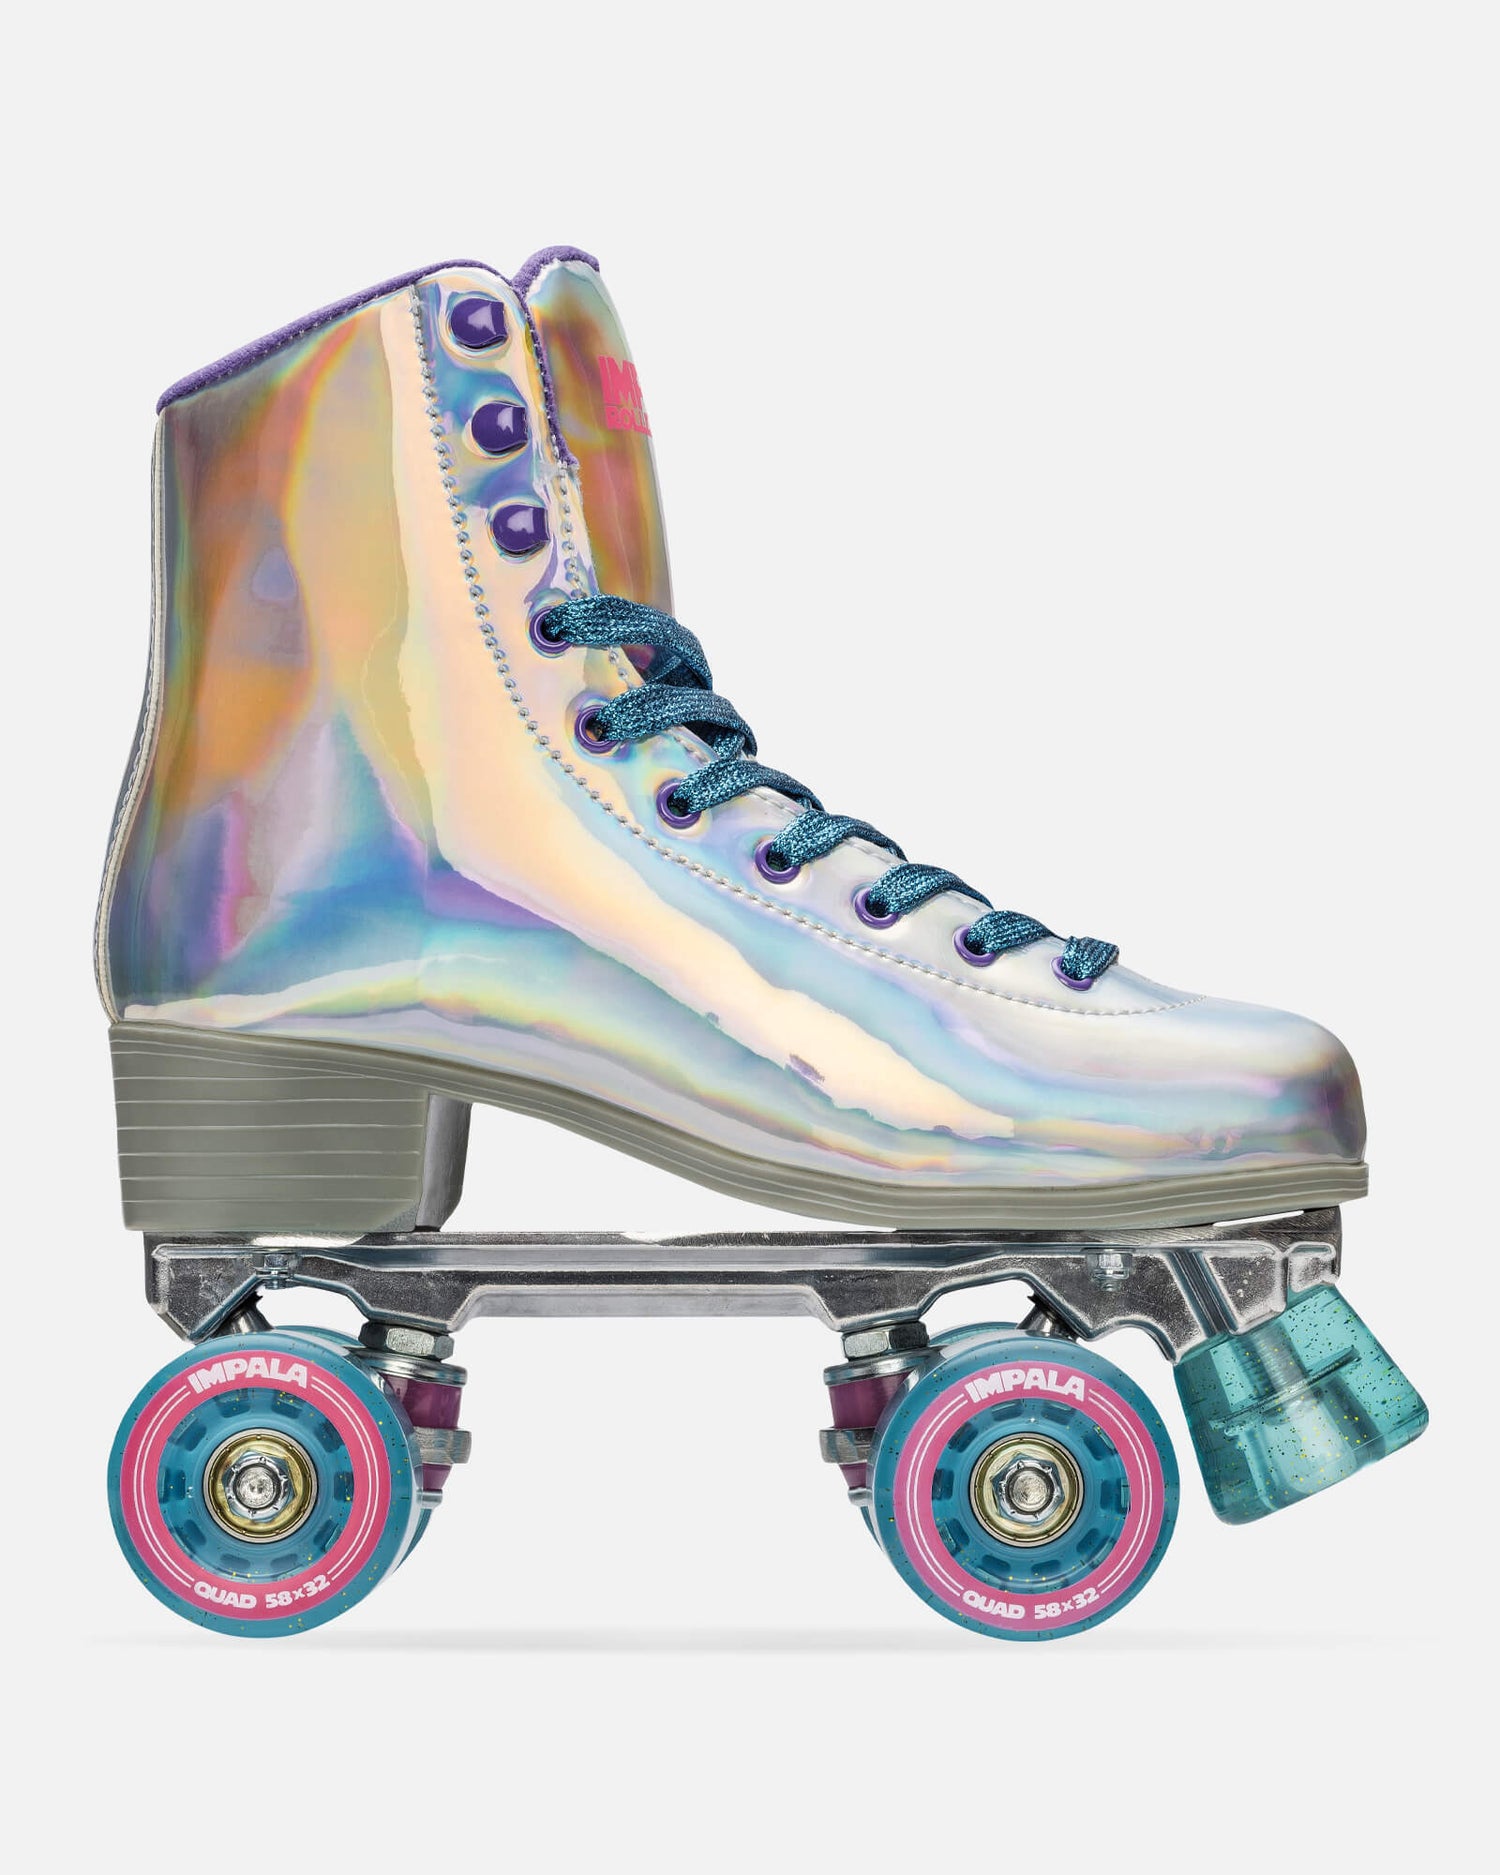 Patins Impala Roller Skates Impala - Holographic in Holographic